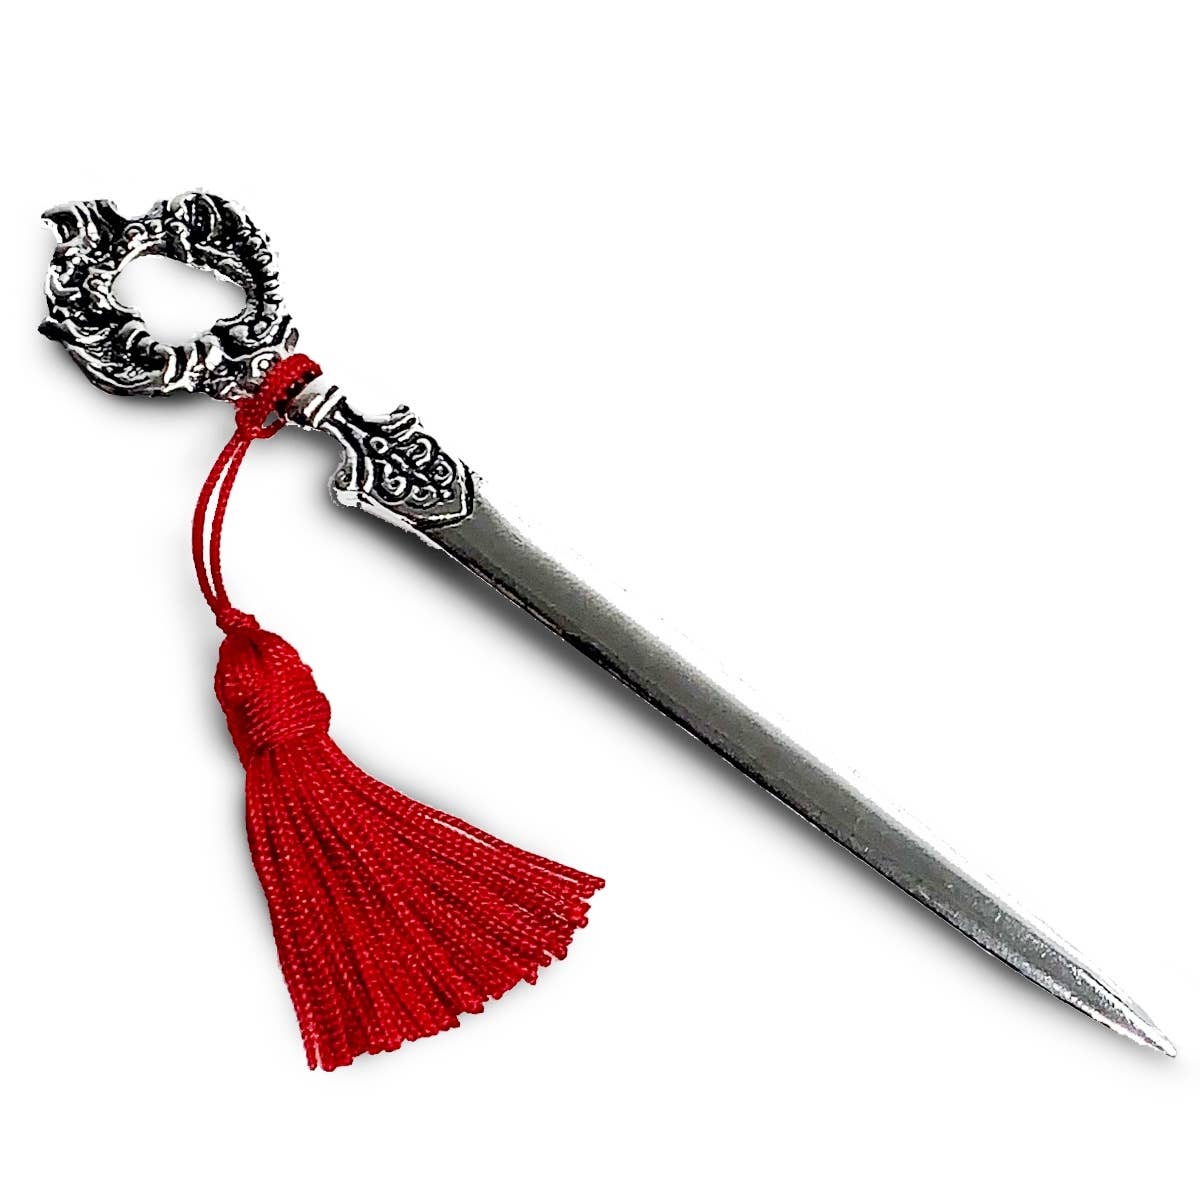 Pewter Letter Opener with Red Tassel